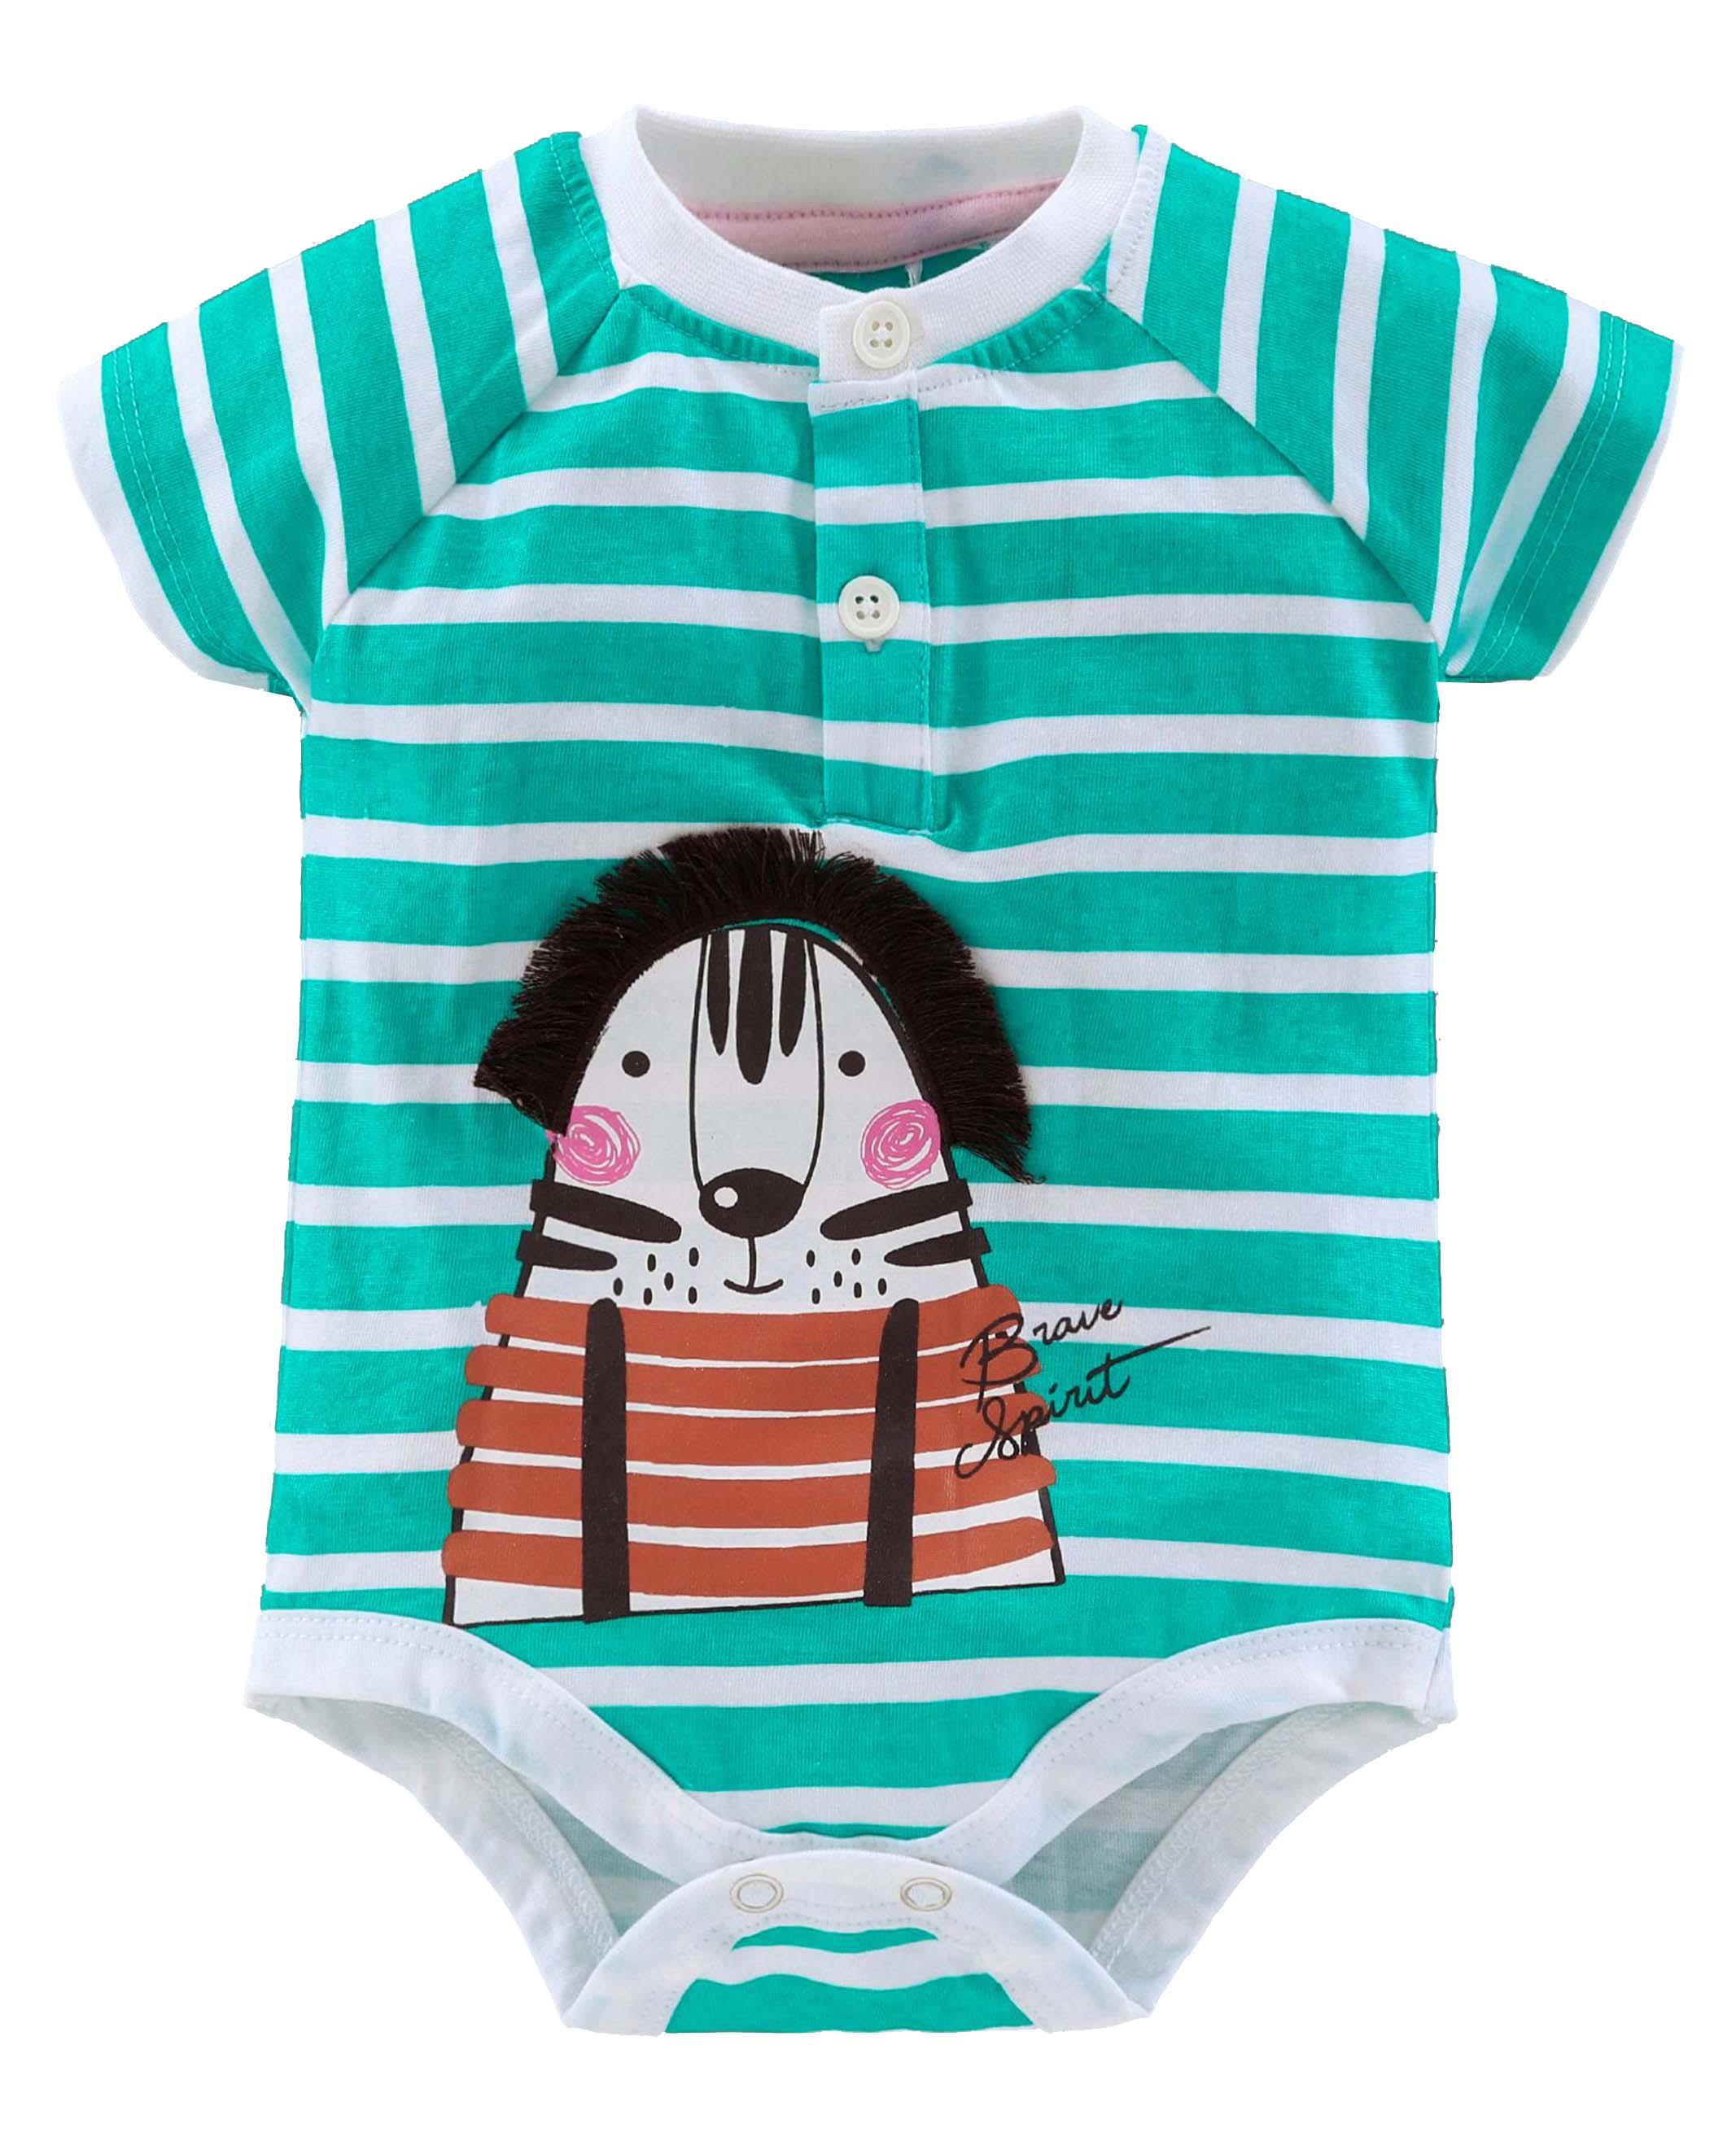 New Born Baby Boy Striped Graphic Printed Body Suit - Juscubs